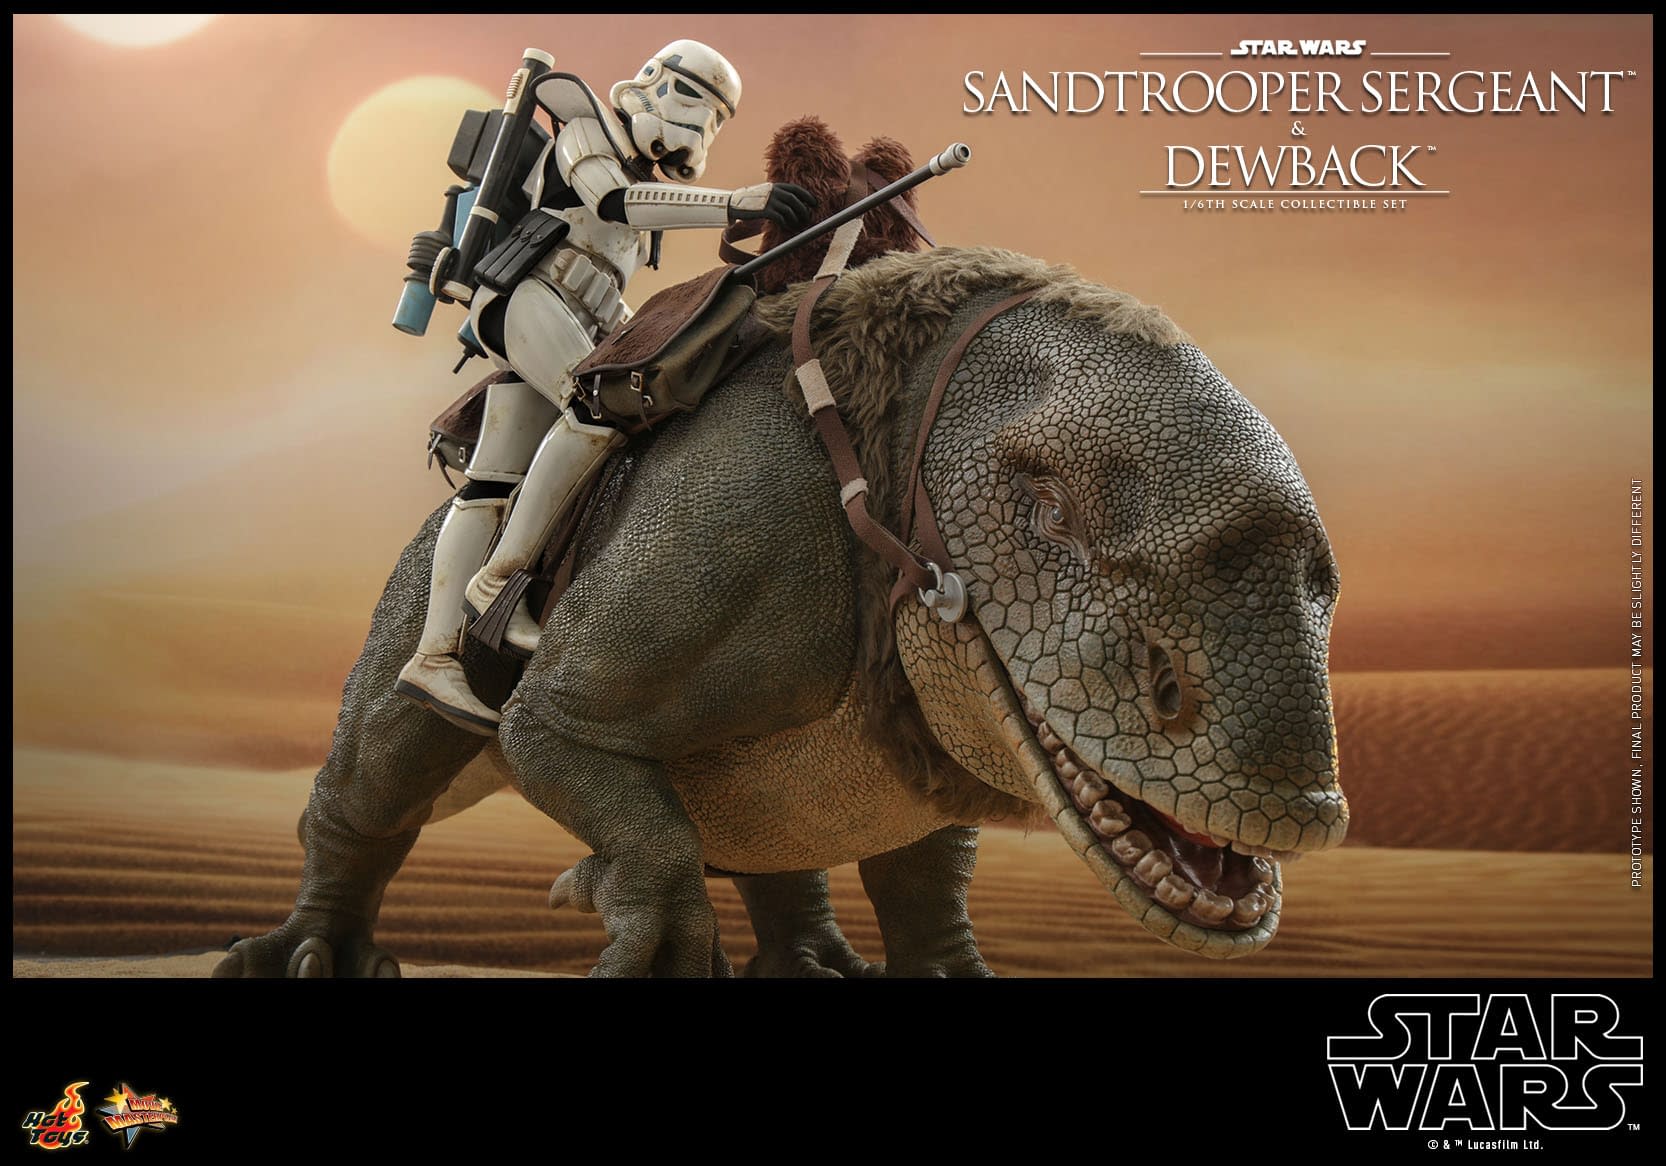 Search for Droids with Hot Toys New Star Wars Sandtrooper Figure 